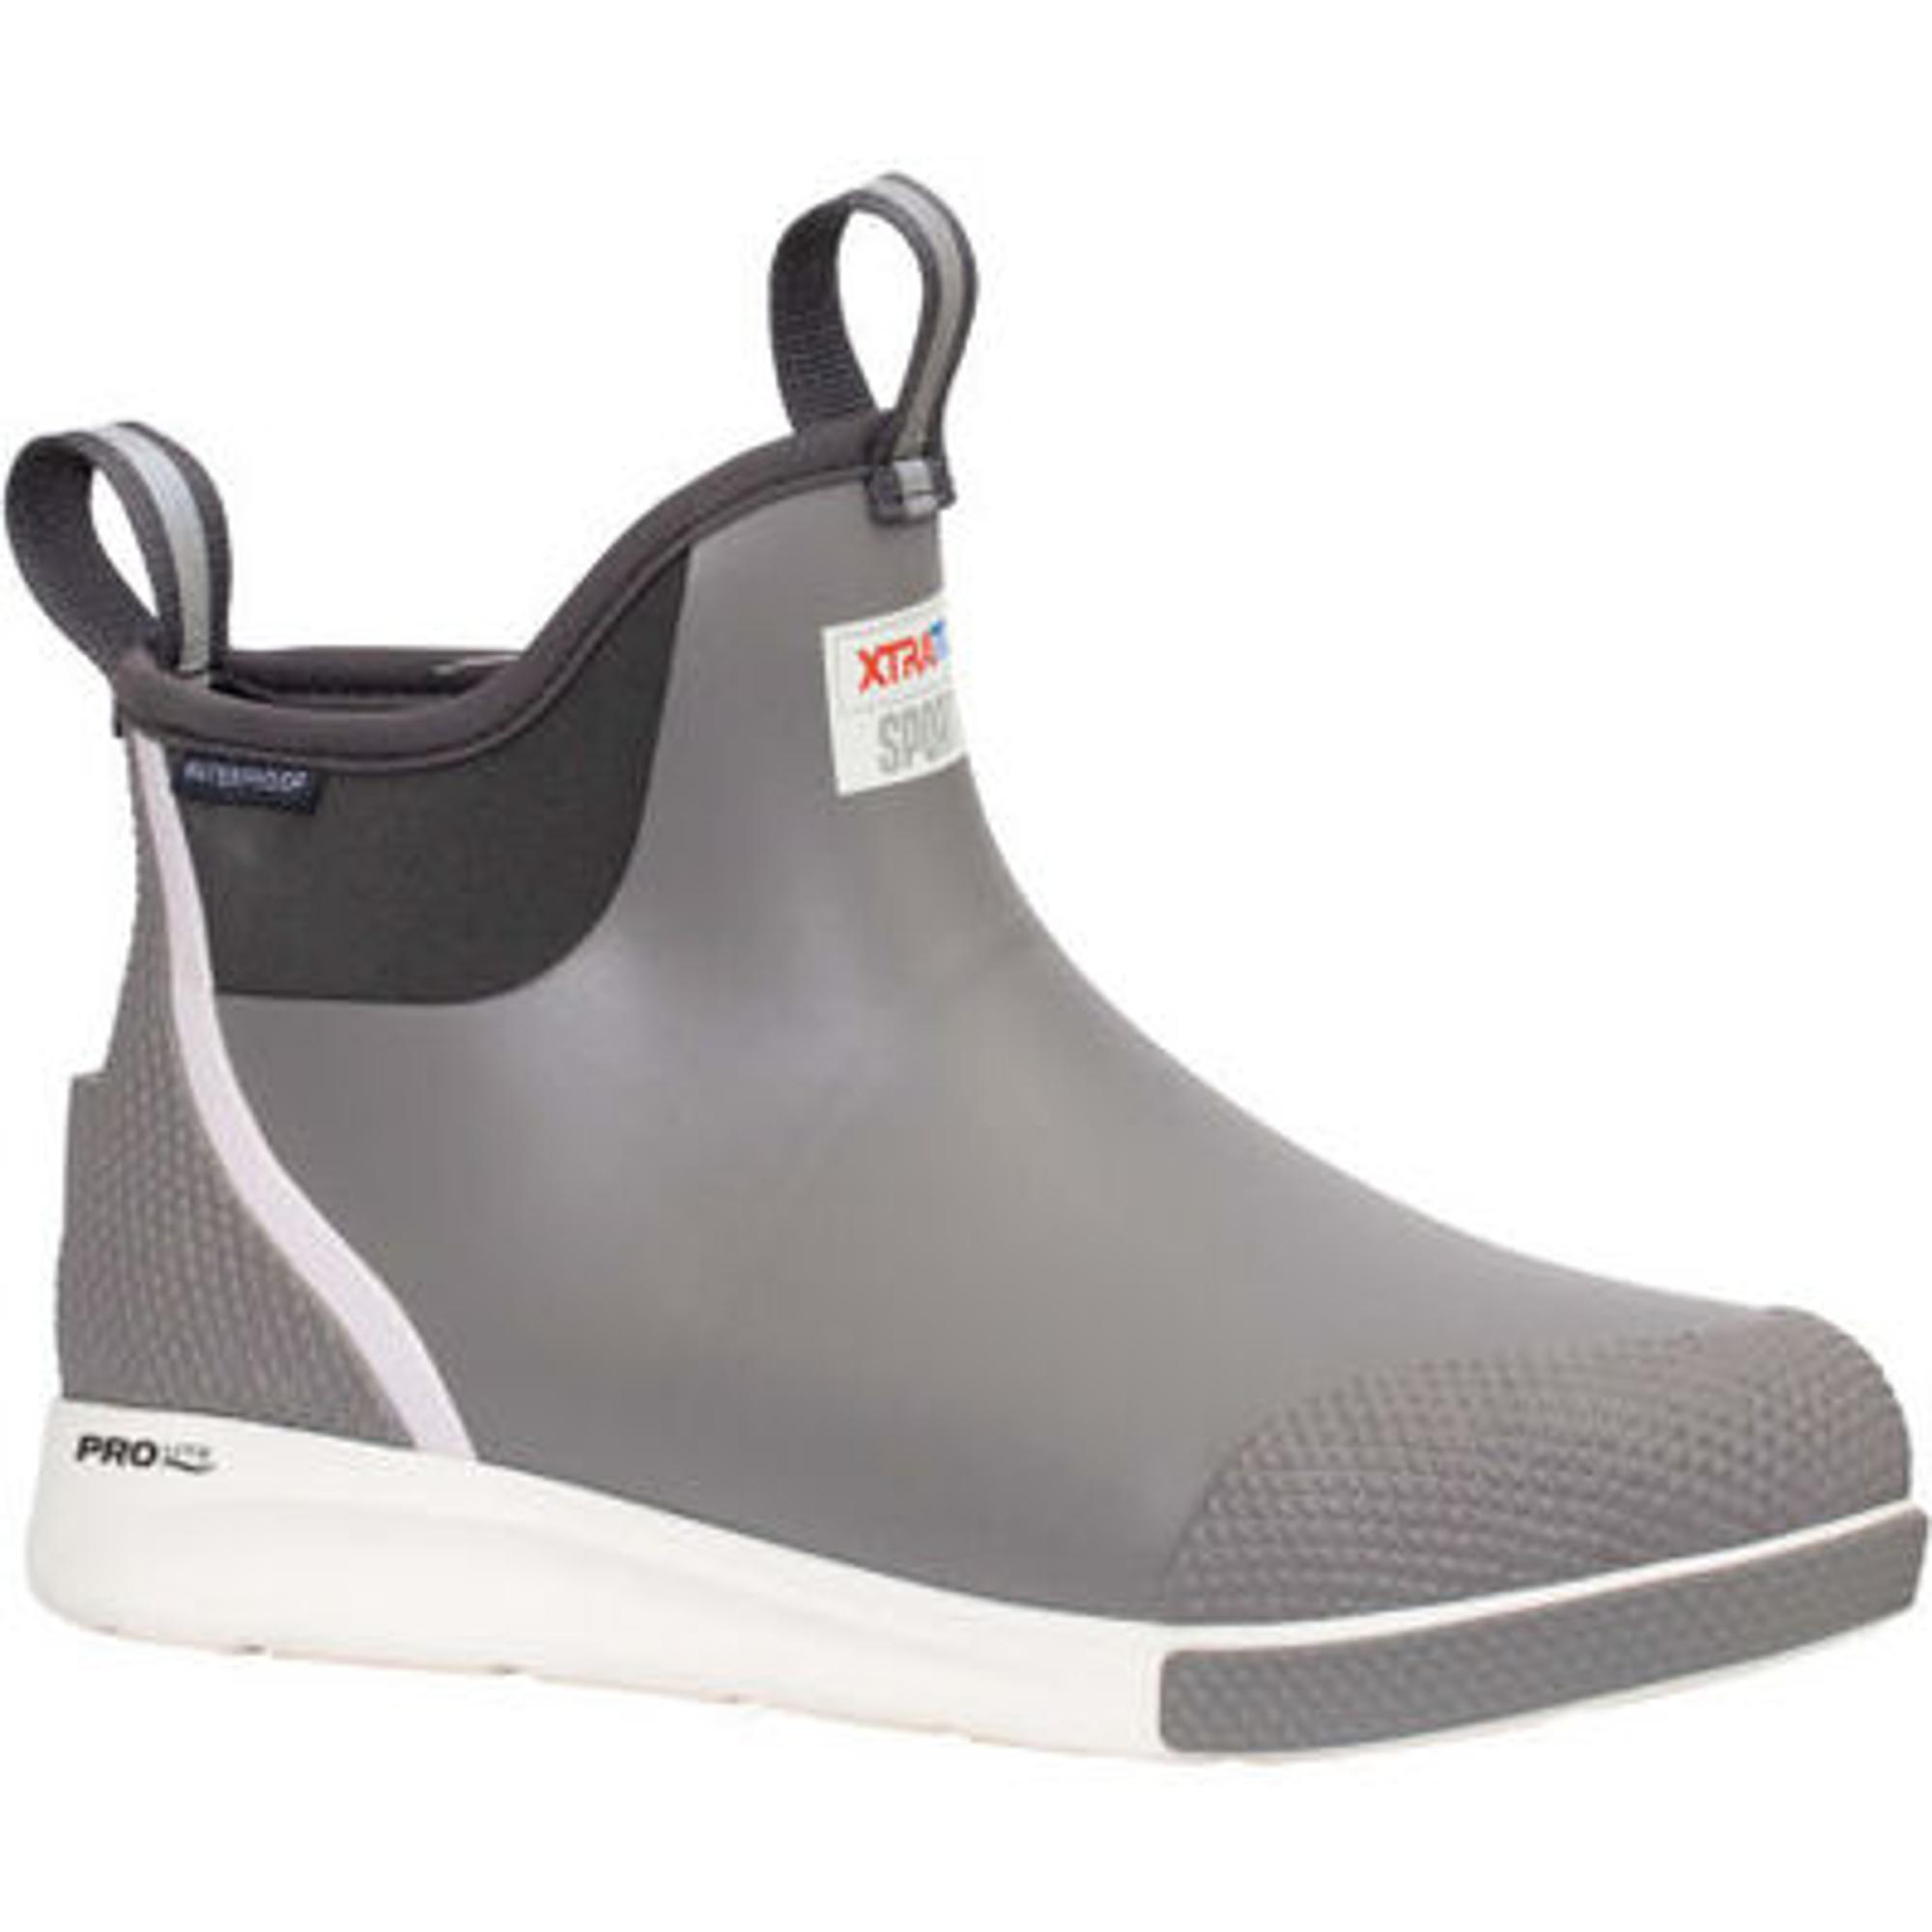 Ankle Deck Boot Sport